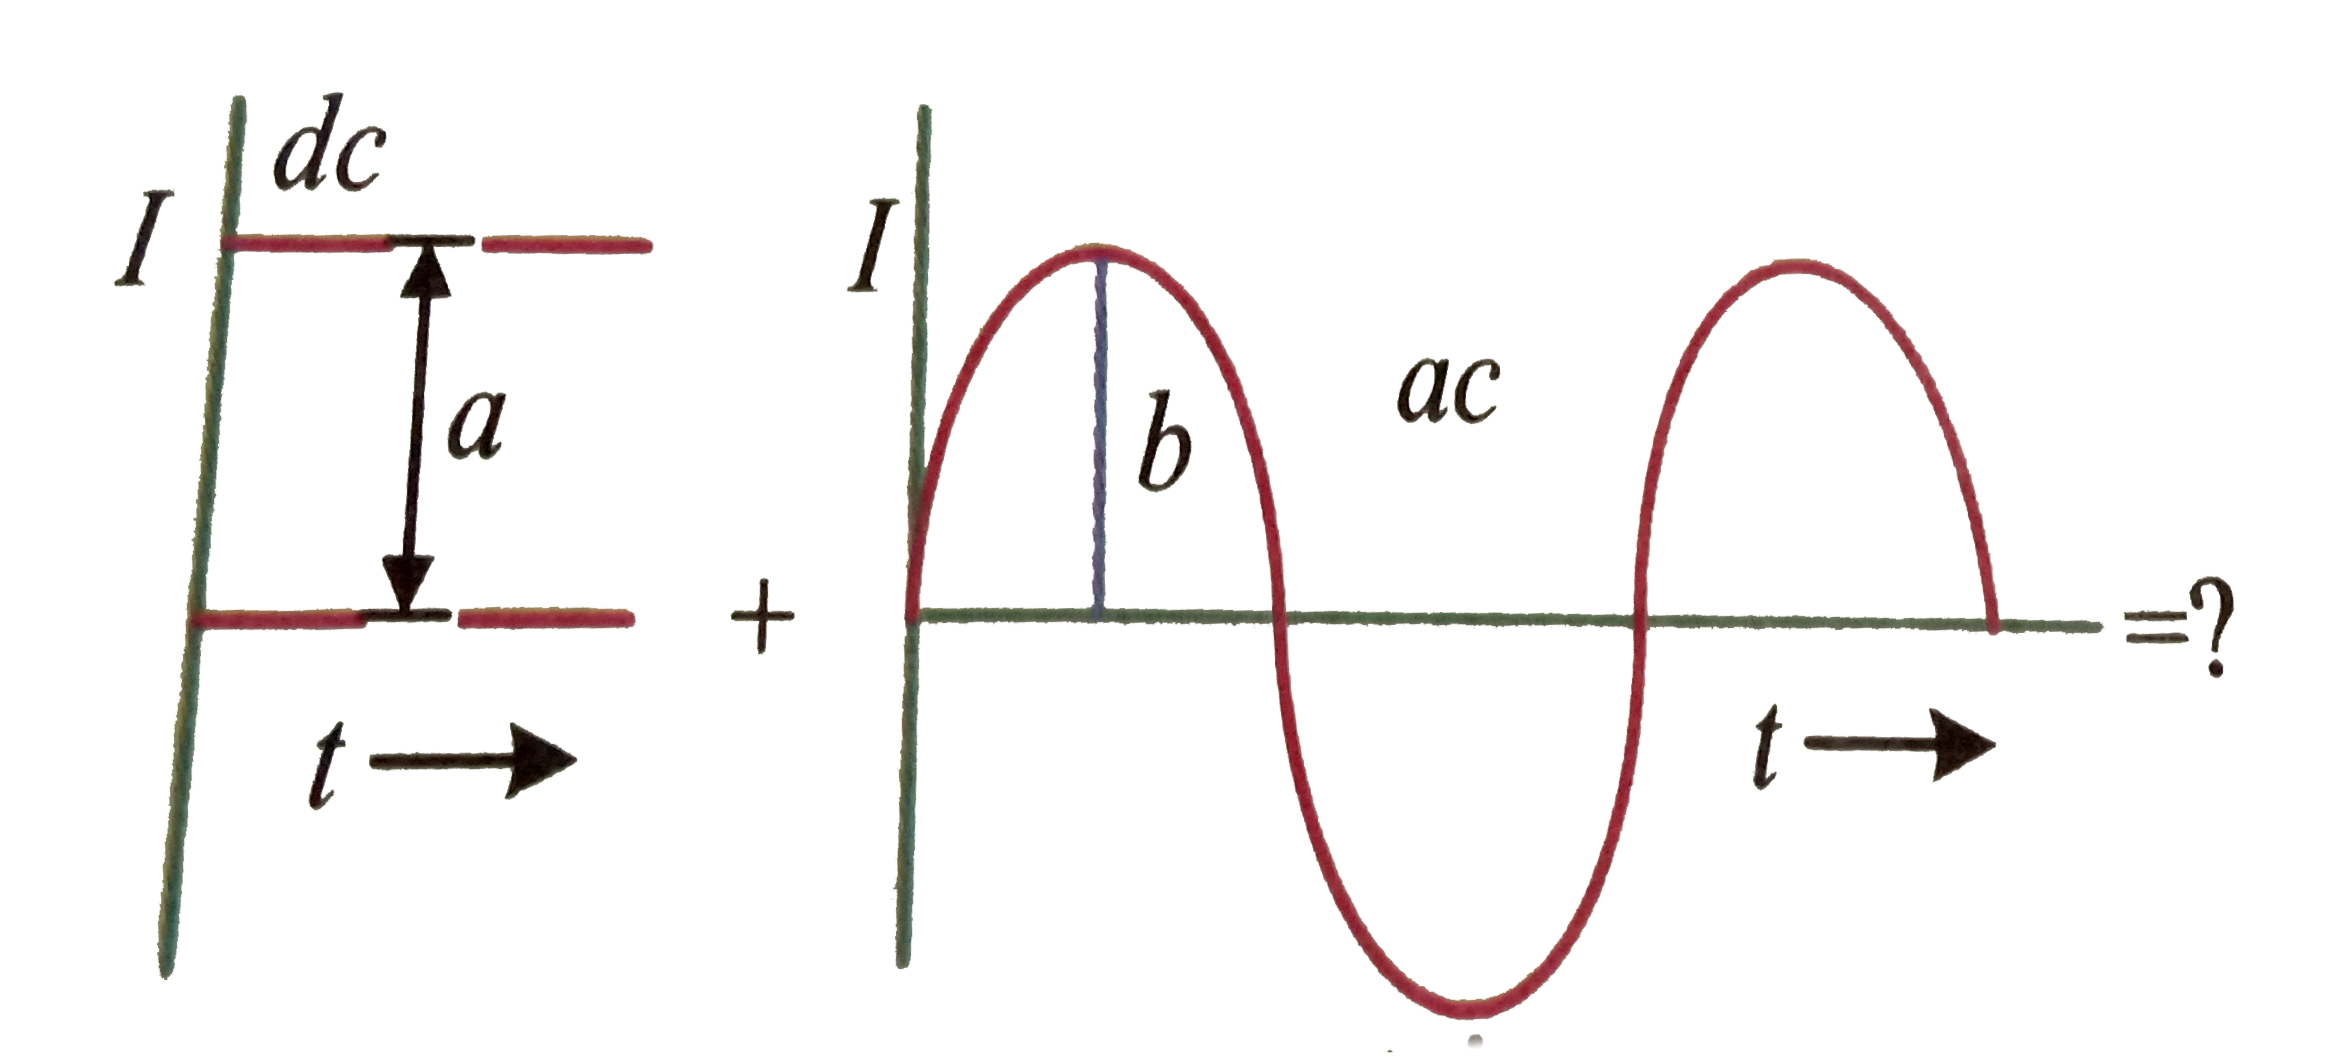 If a direct current of value a ampere is superimposed on an alternating current 1 = b sin omega t flowing through a wire, what is the effective value of the resulting current in the circuit?